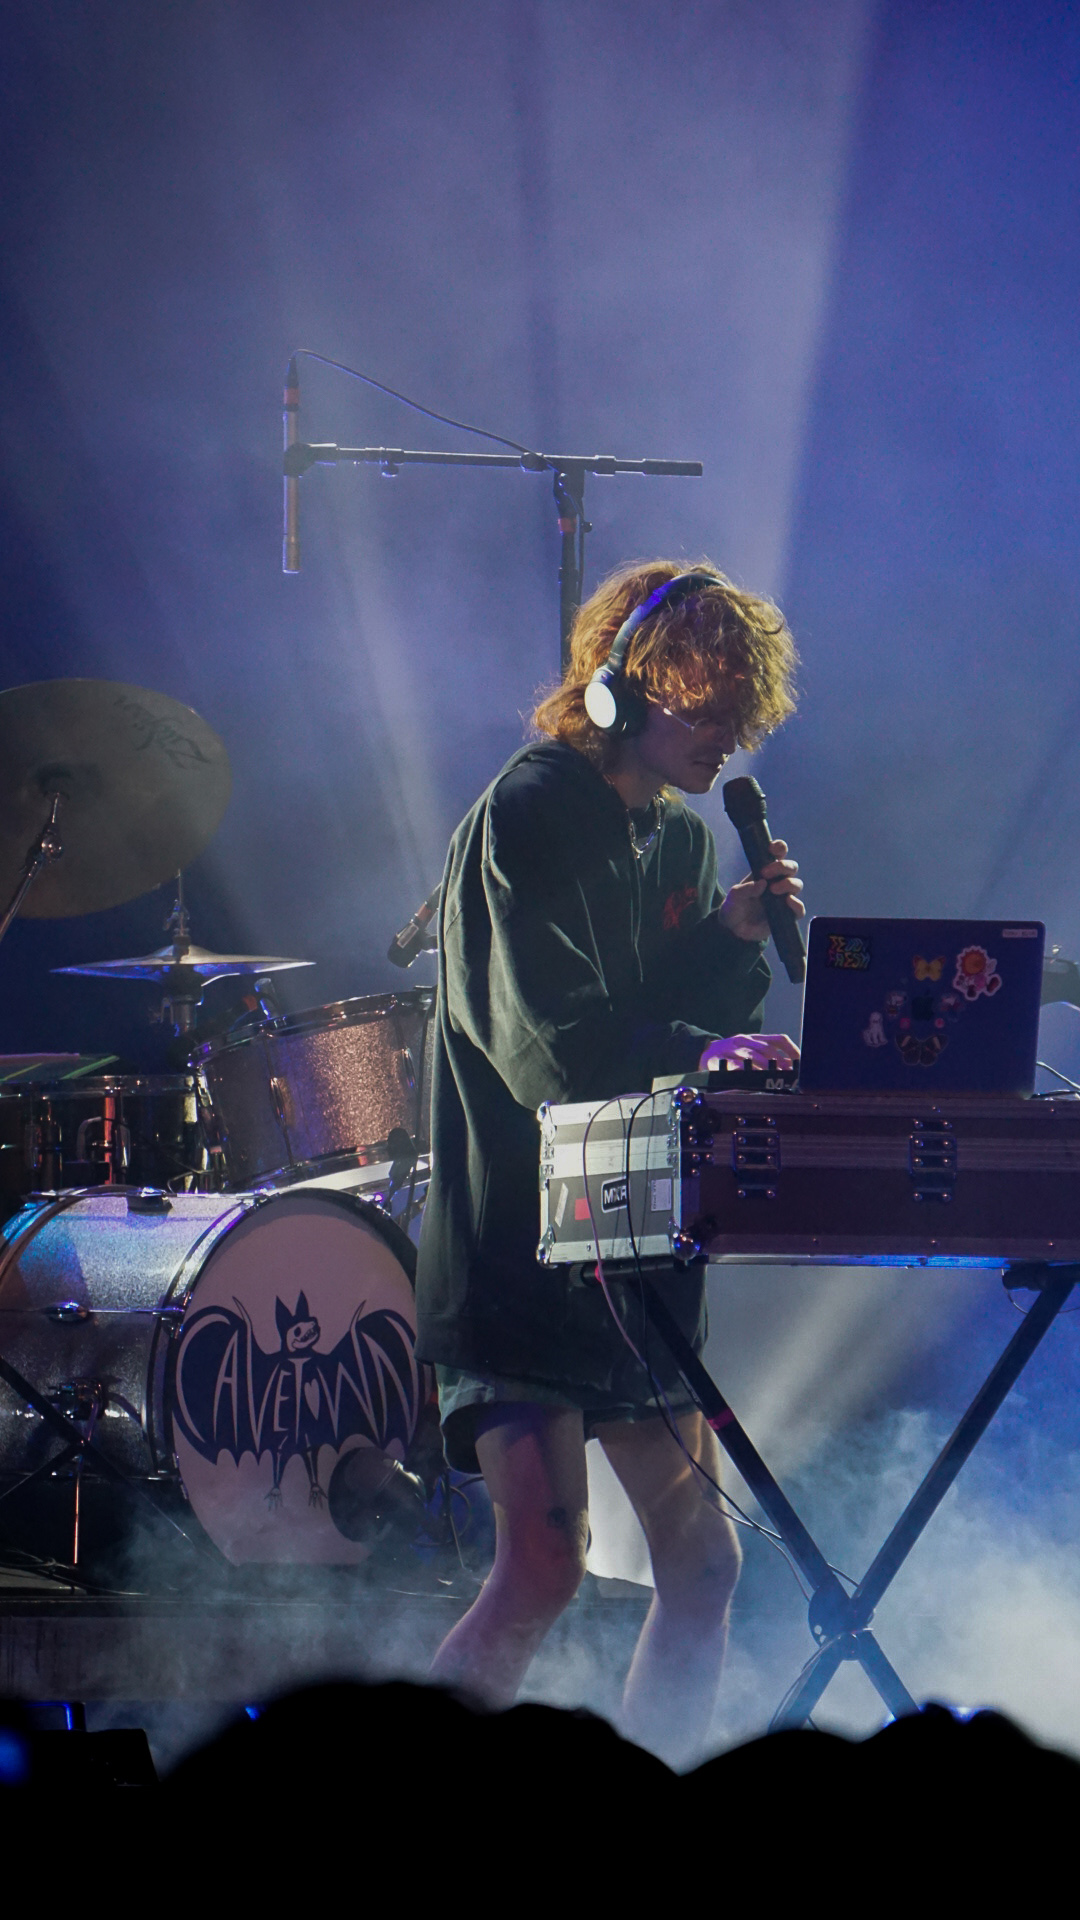 Cavetown and Tessa Violet playing at The Mission Ballroom (Photos: Christina Lane, Oliver Thieme)